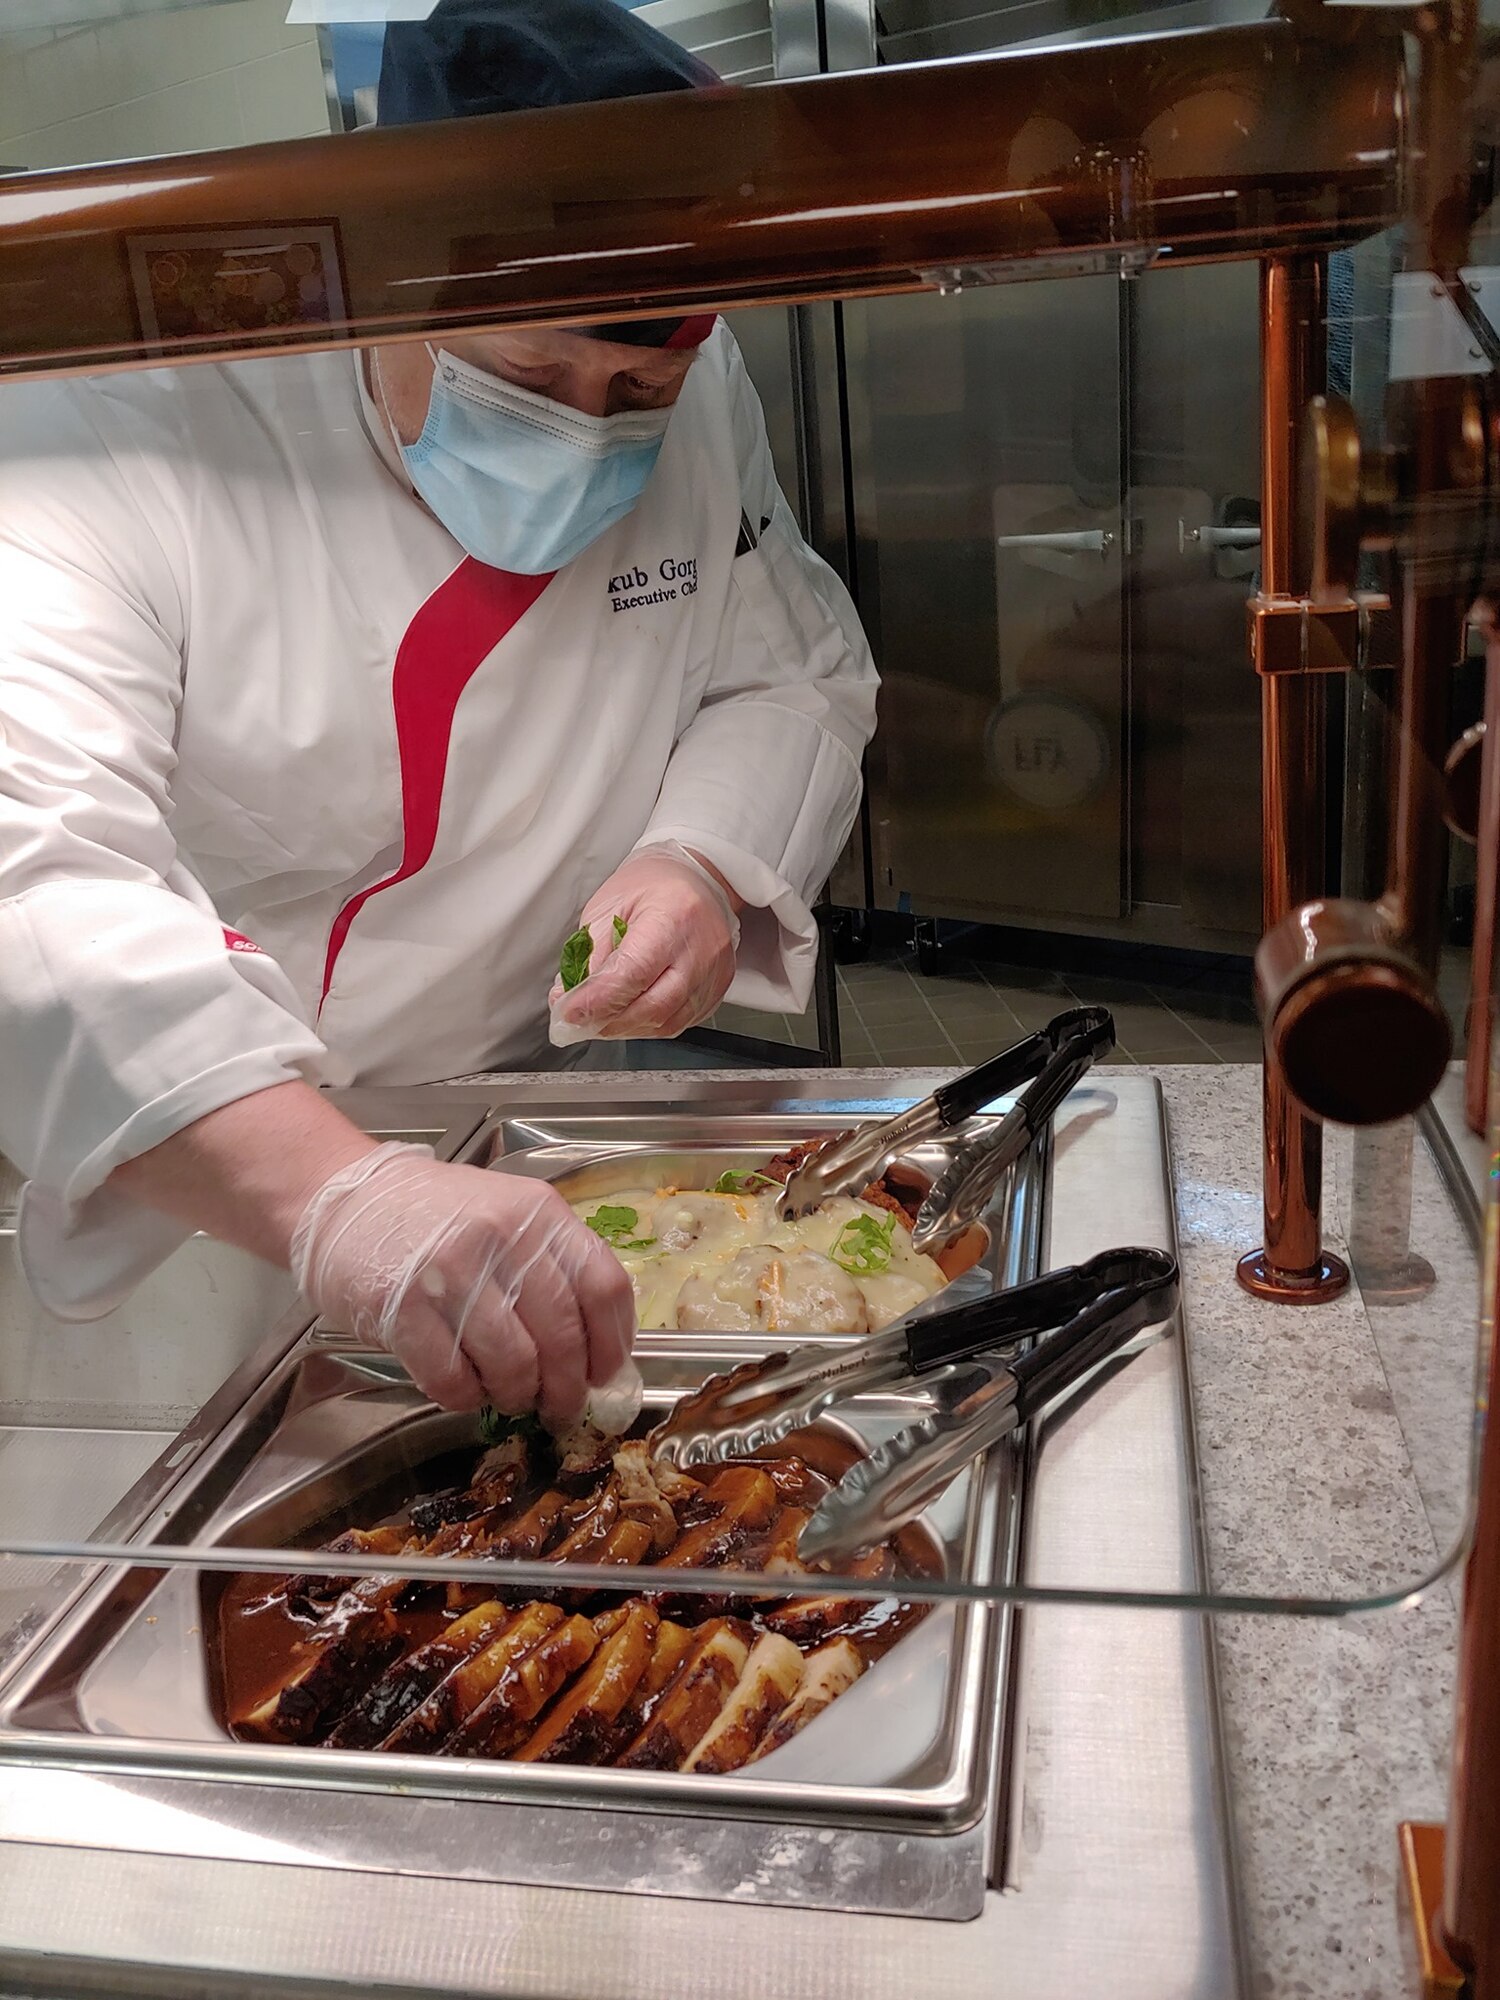 Food 2.0 brings healthier dining options to Seymour-Johnson